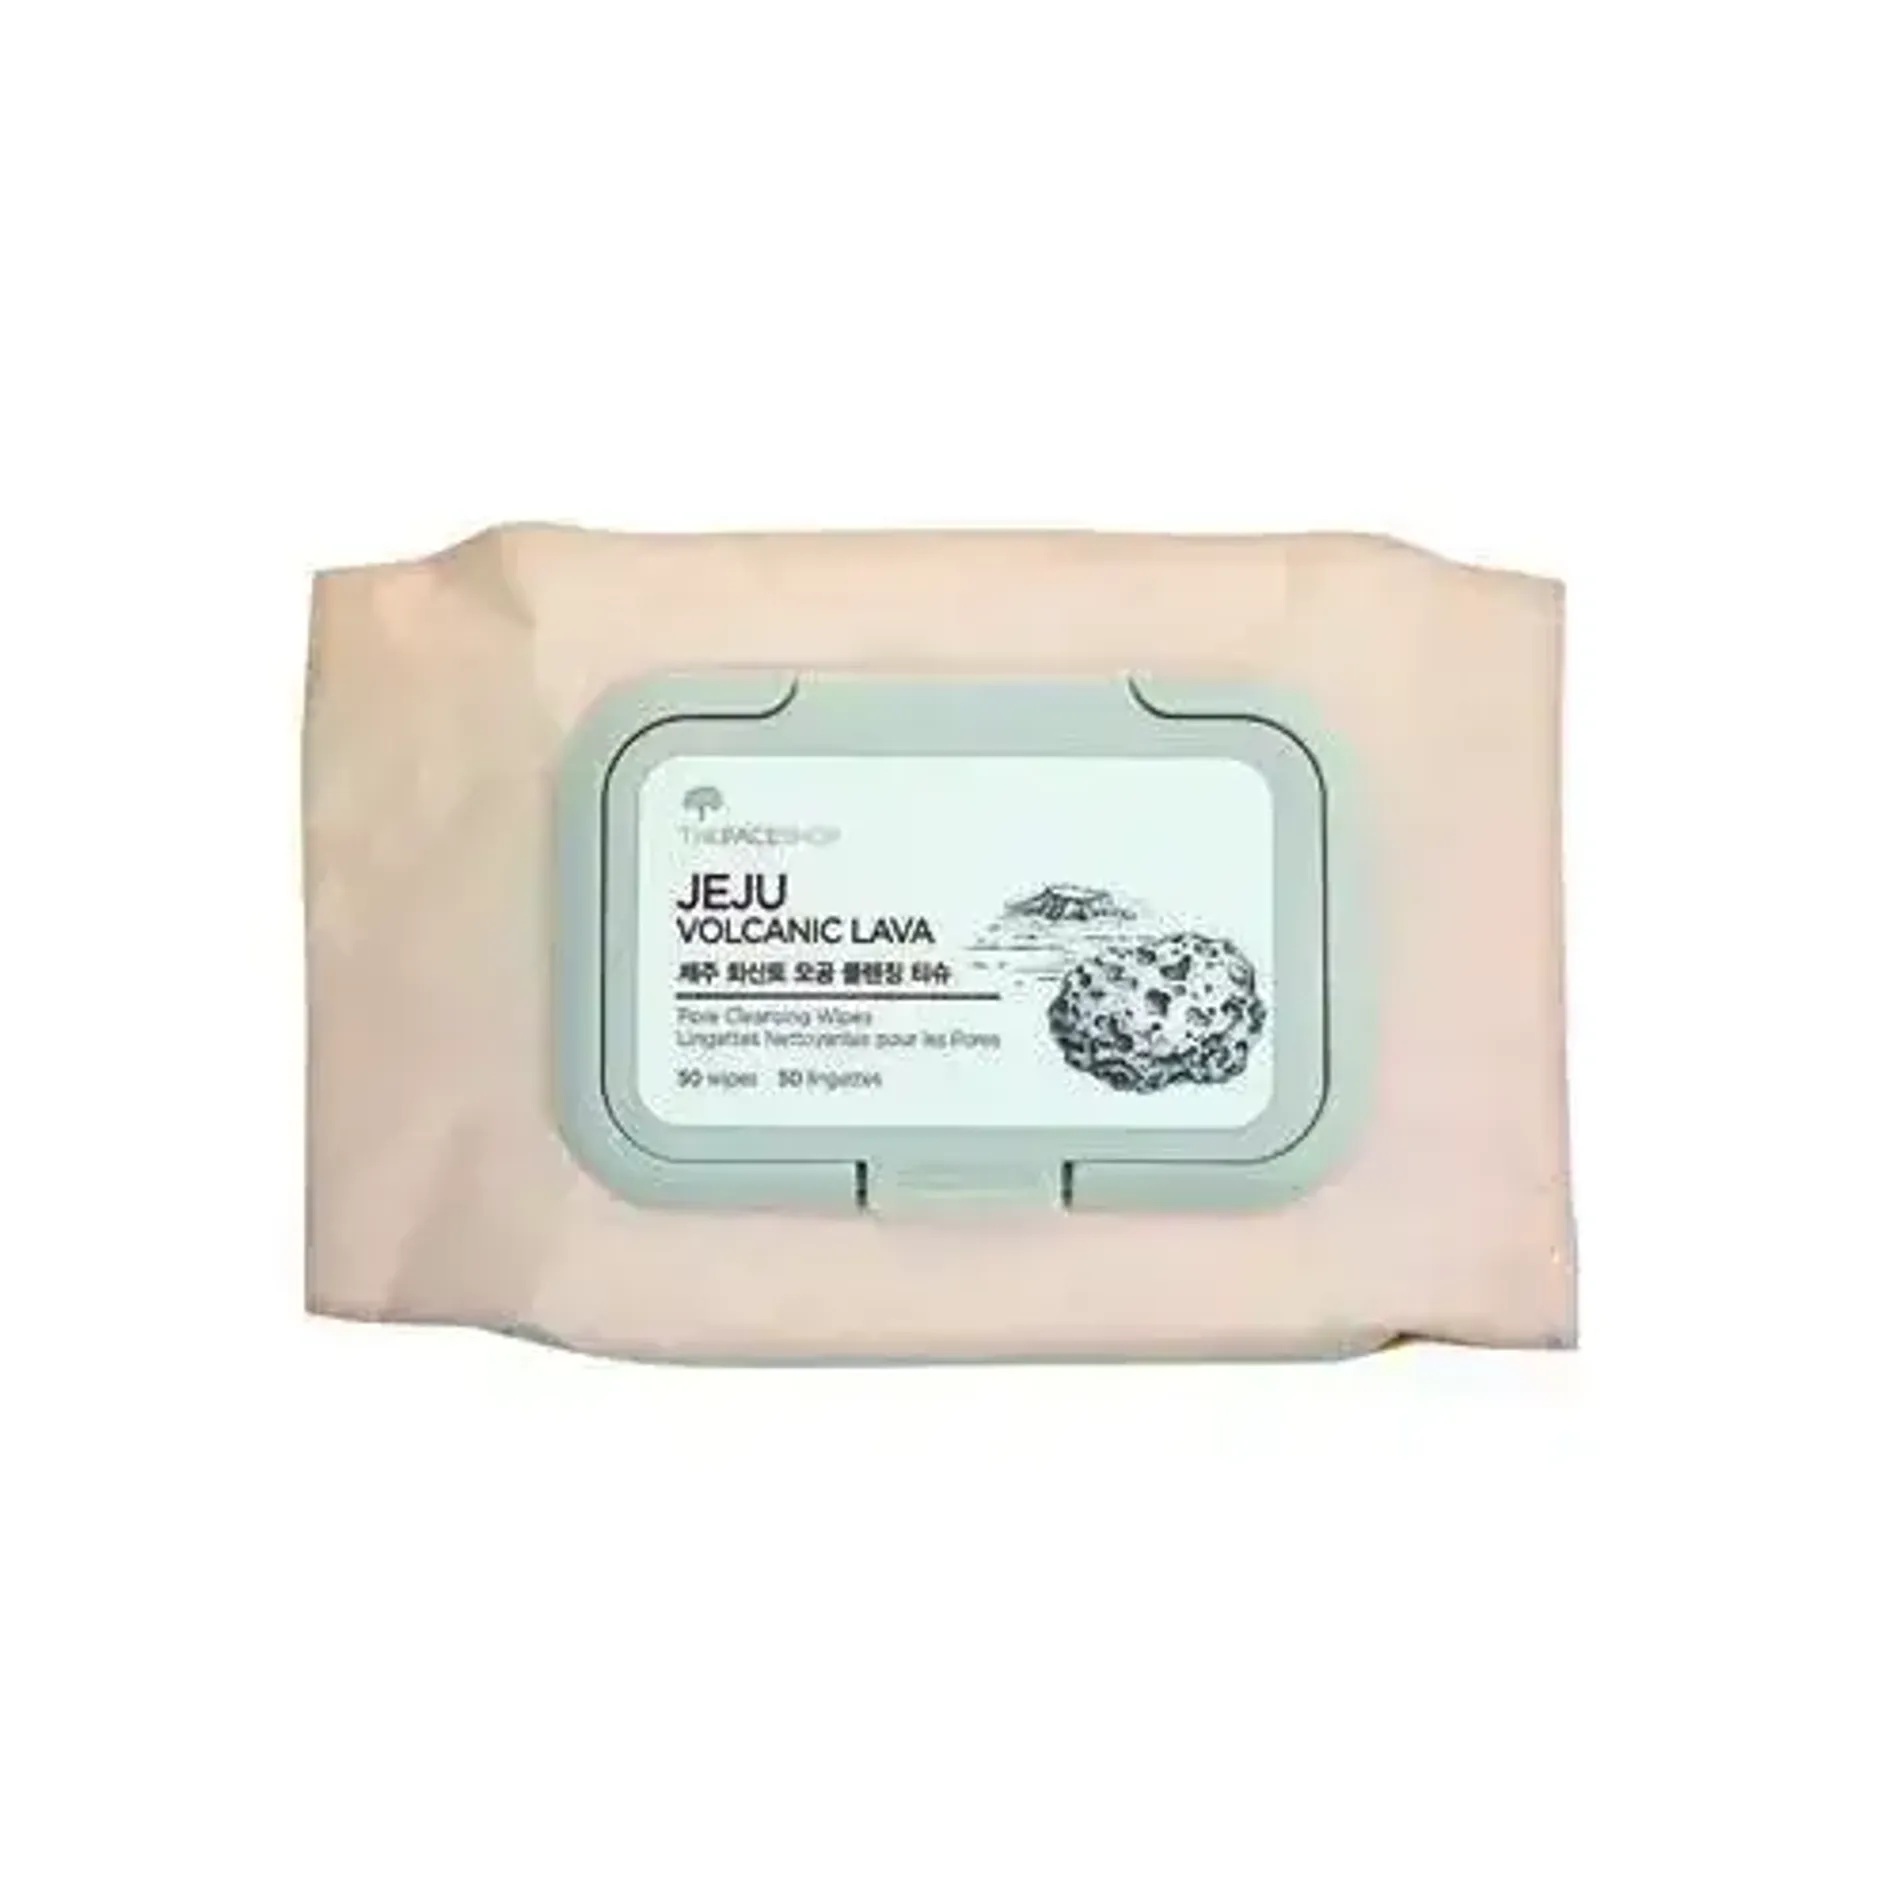 khan-giay-tay-trang-thanh-loc-lo-chan-long-thefaceshop-jeju-volcanic-lava-pore-cleansing-wipes-1